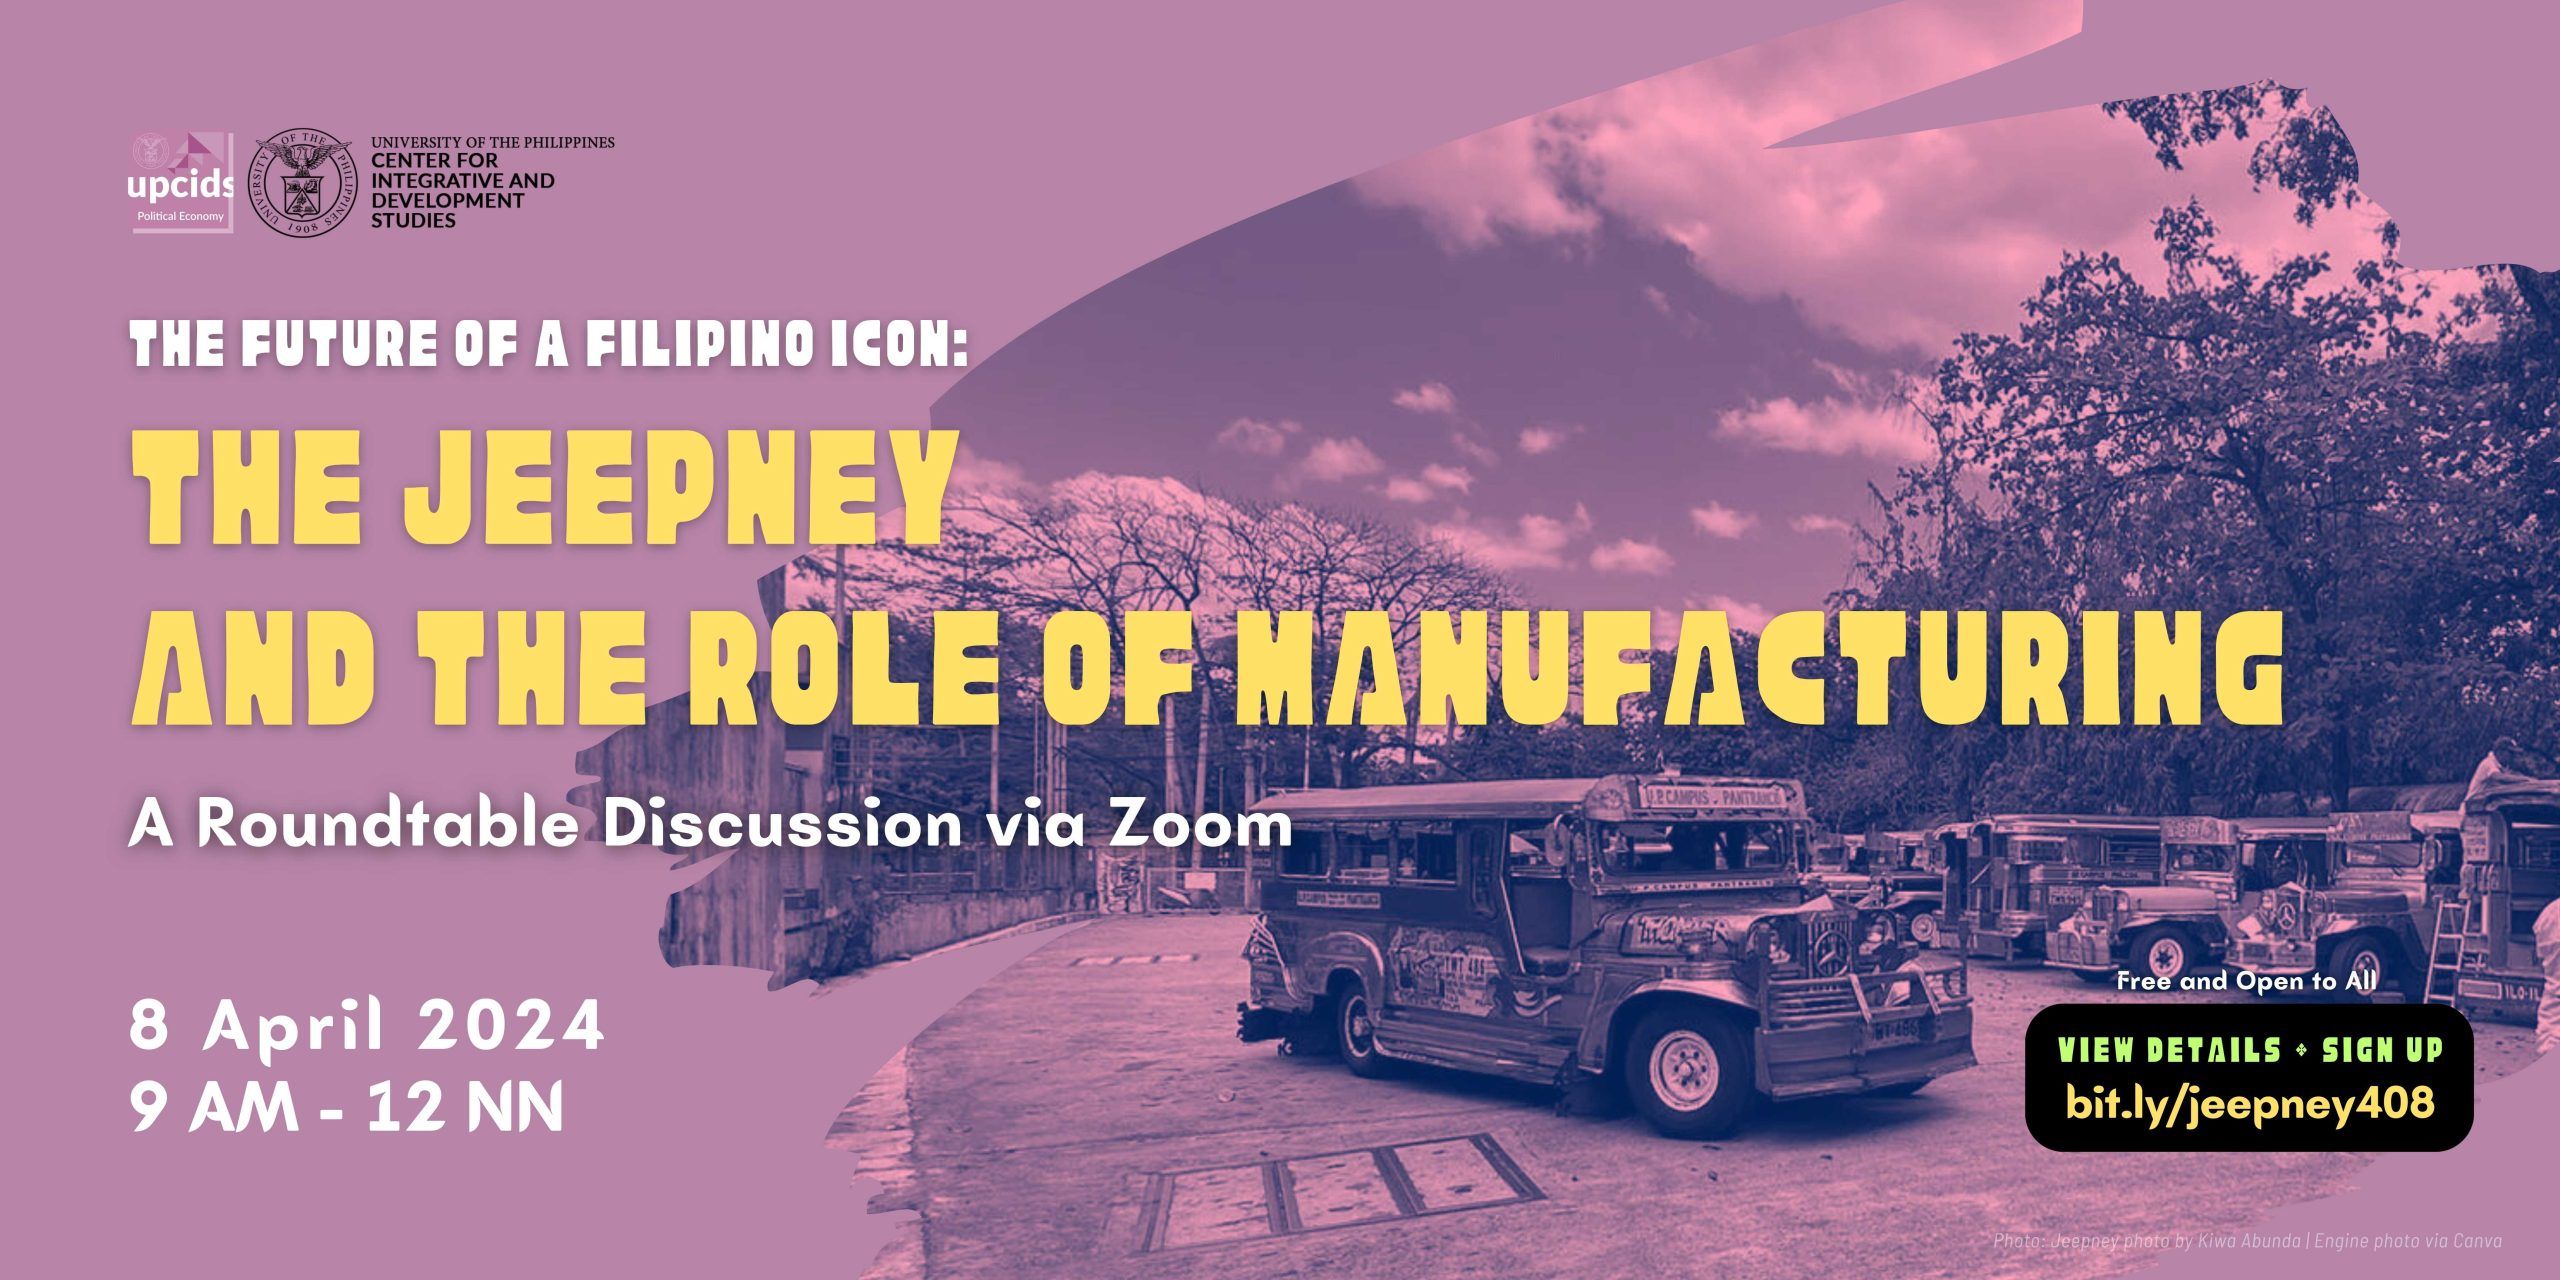 wp-content/uploads/2024/04/Jeepney_Manufacturing_SL02-scaled.jpg